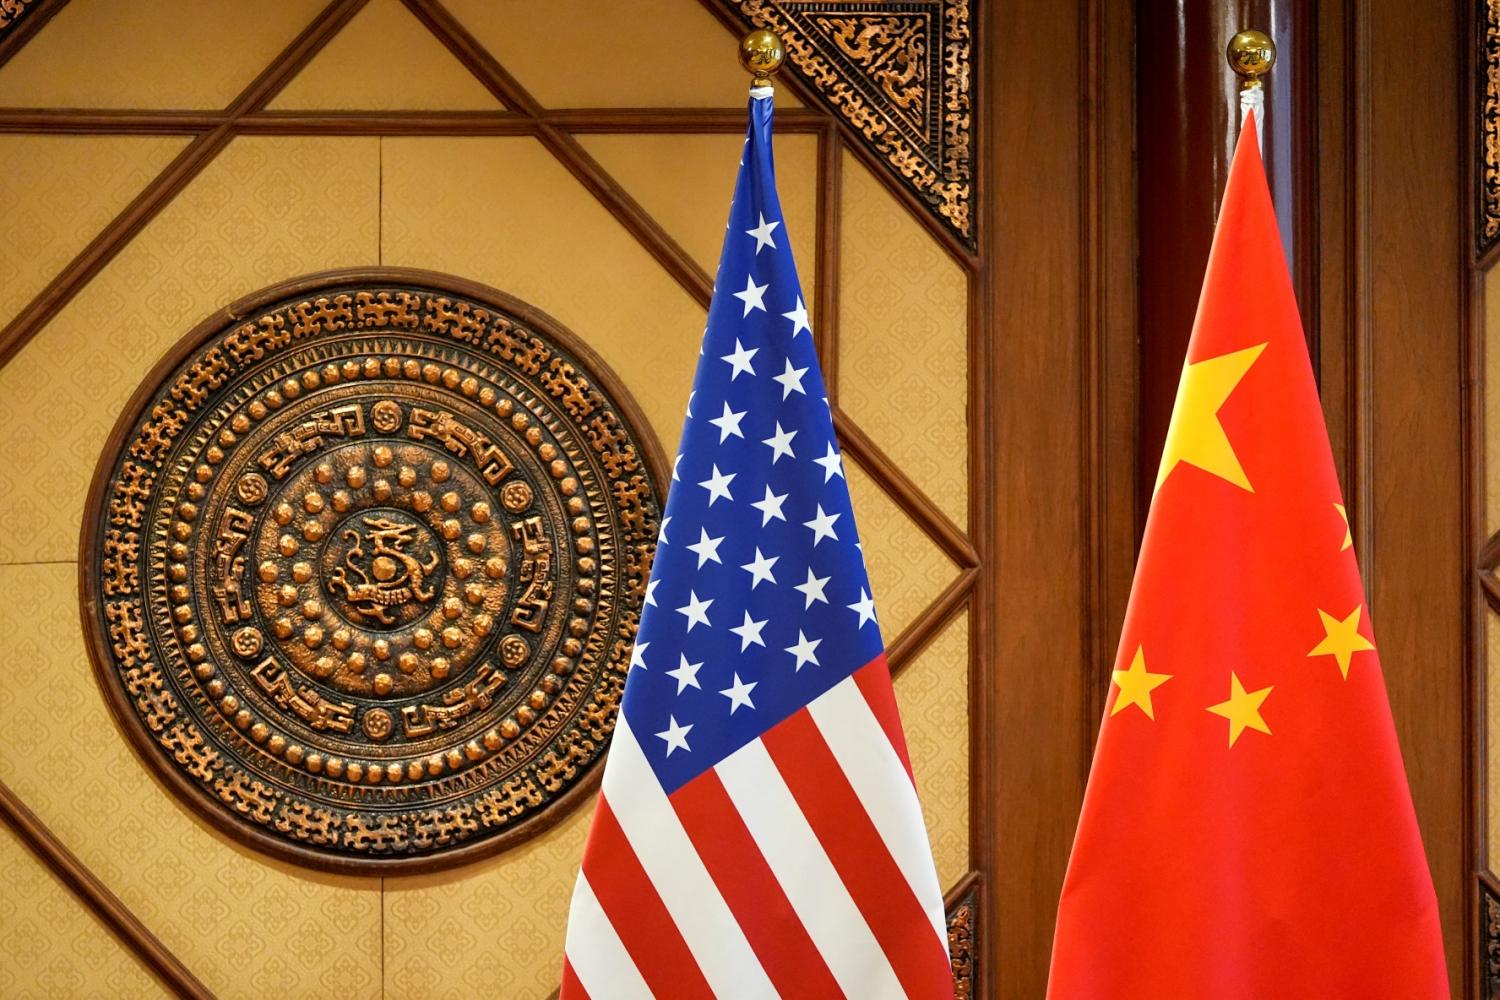 Flags of the U.S. and China sit in a room where U.S. Secretary of State Antony Blinken meets with China's Minister of Public Security Wang Xiaohong at the Diaoyutai State Guesthouse, April 26, 2024, in Beijing, China.